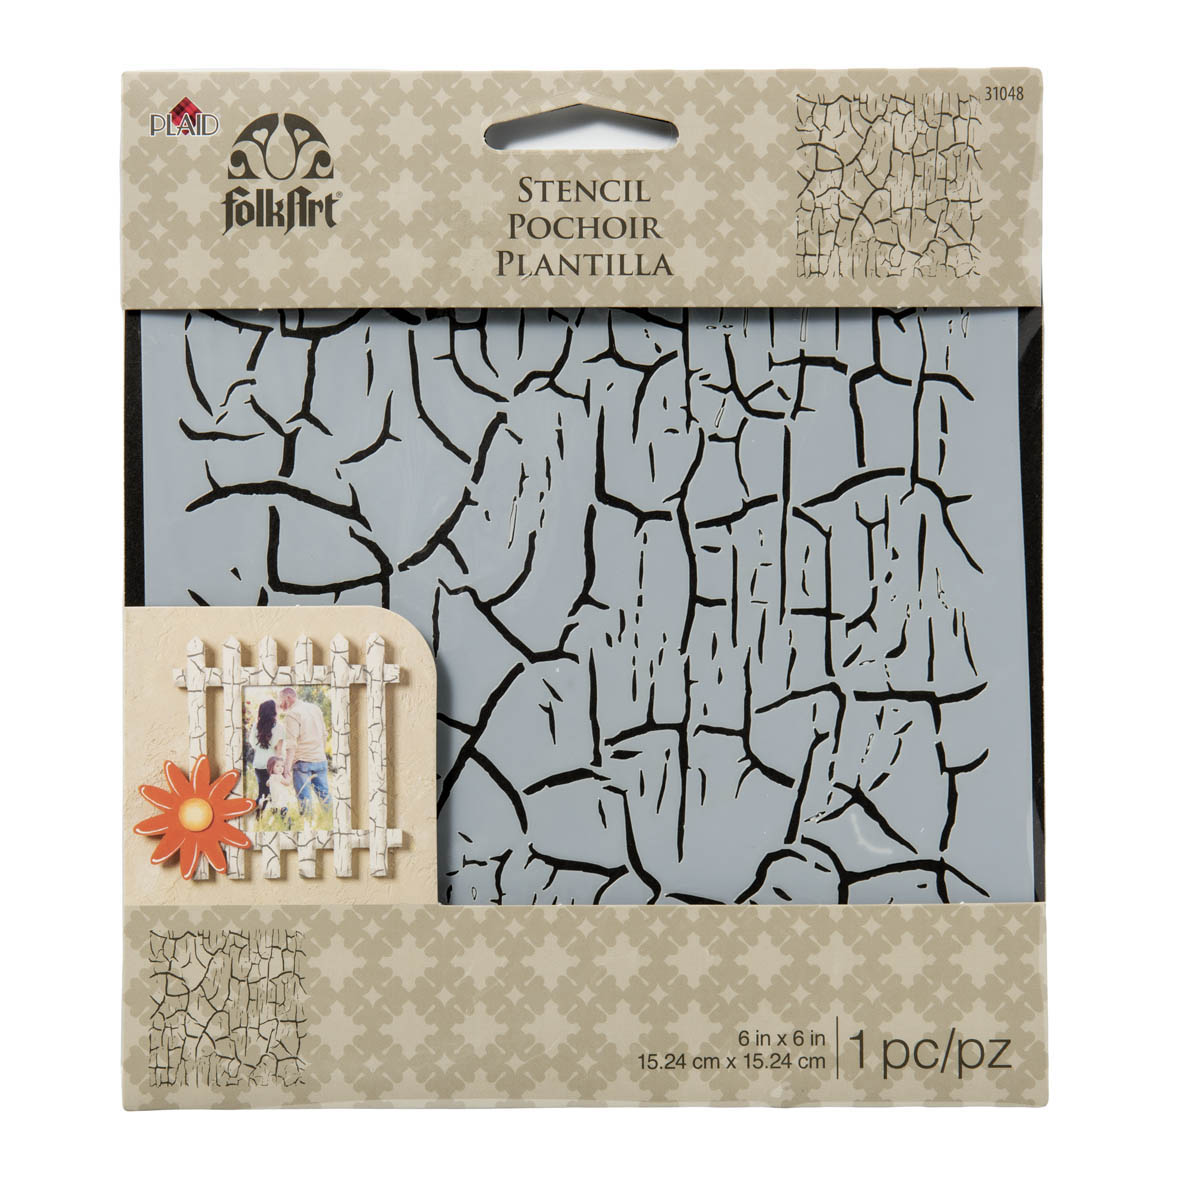 FolkArt ® Painting Stencils - Small - Crackle - MS31048